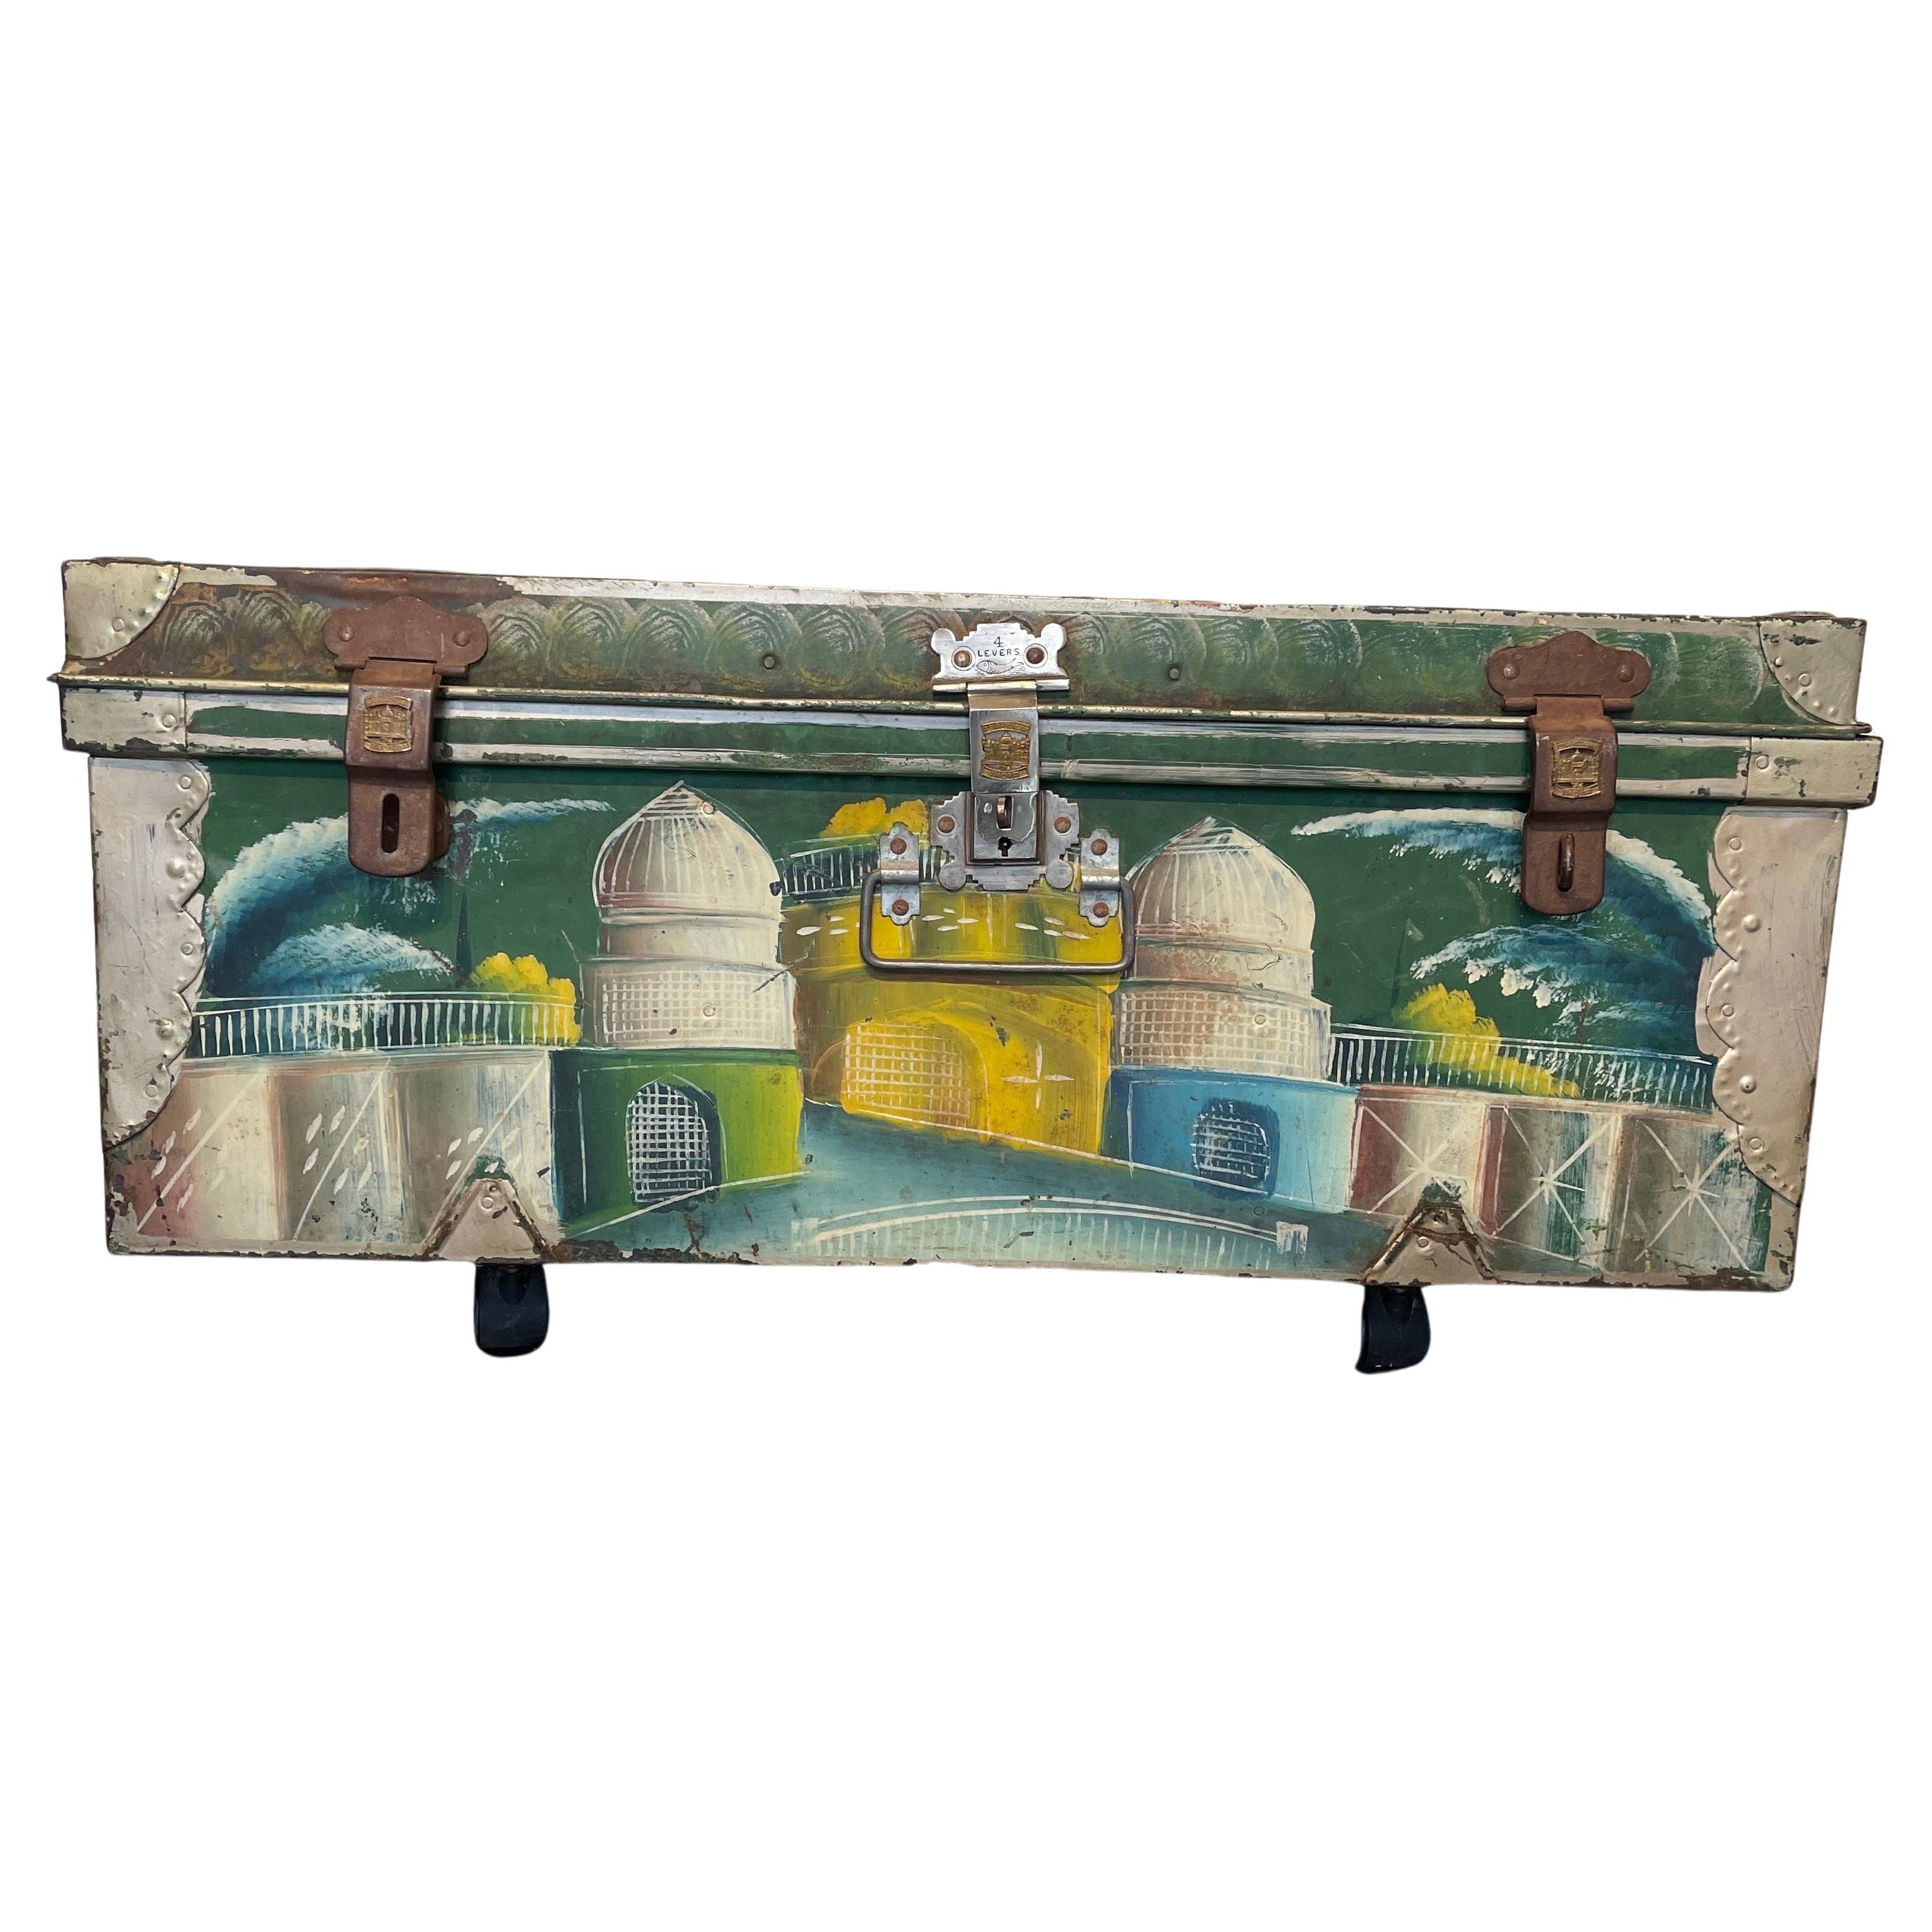 Vintage suitcase trunk hand painted with elaborate scenes of India, maker's mark Khwaja, Bombay, India. This eye catching trunk is a beautiful addition to any decor in your home. The colorful landscape scenes are set against a prominent green